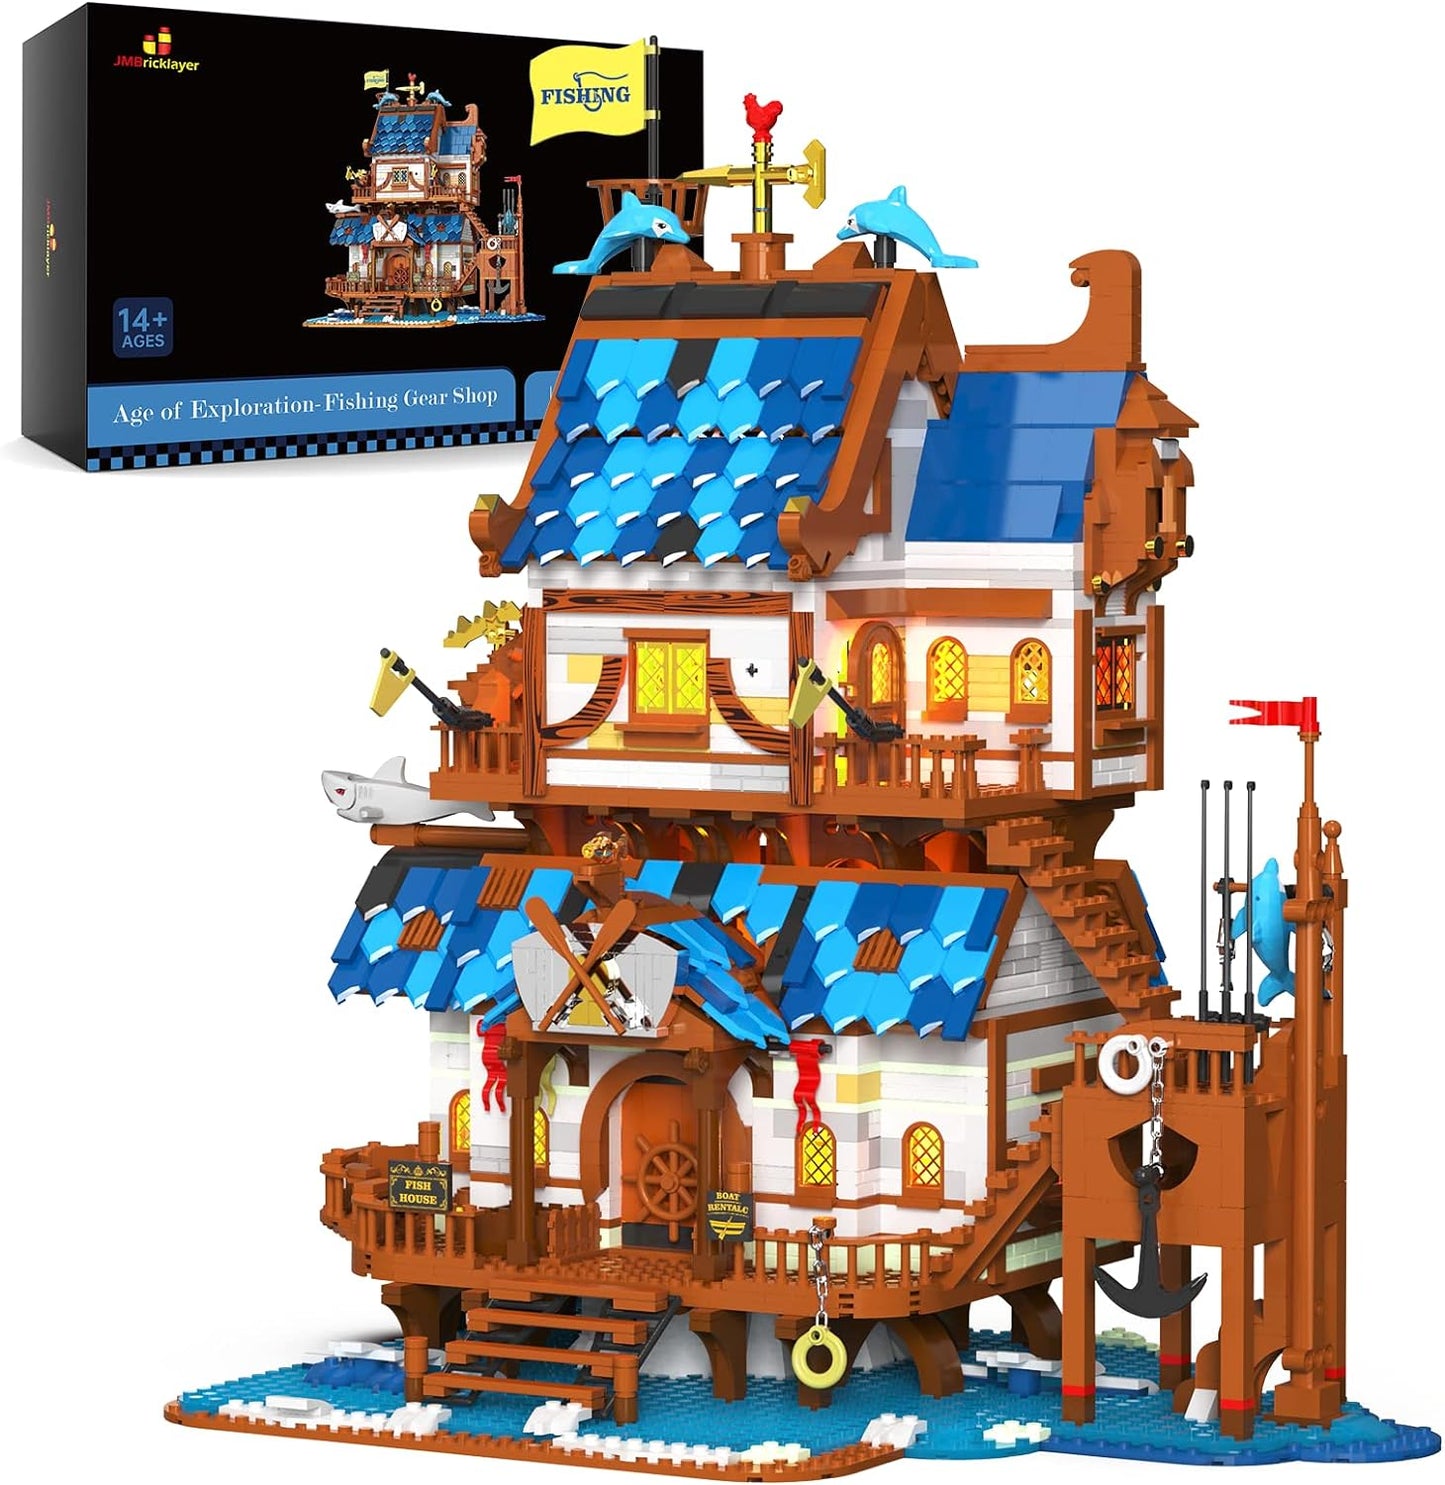 JMBricklayer Medieval Fishing Shop Building Sets for Adults, LED Lighting Kit Creative Fishing Gear Store Castle House Model Toy, Collectible or Home Display, Ideas Gifts for Boys Girls 41107